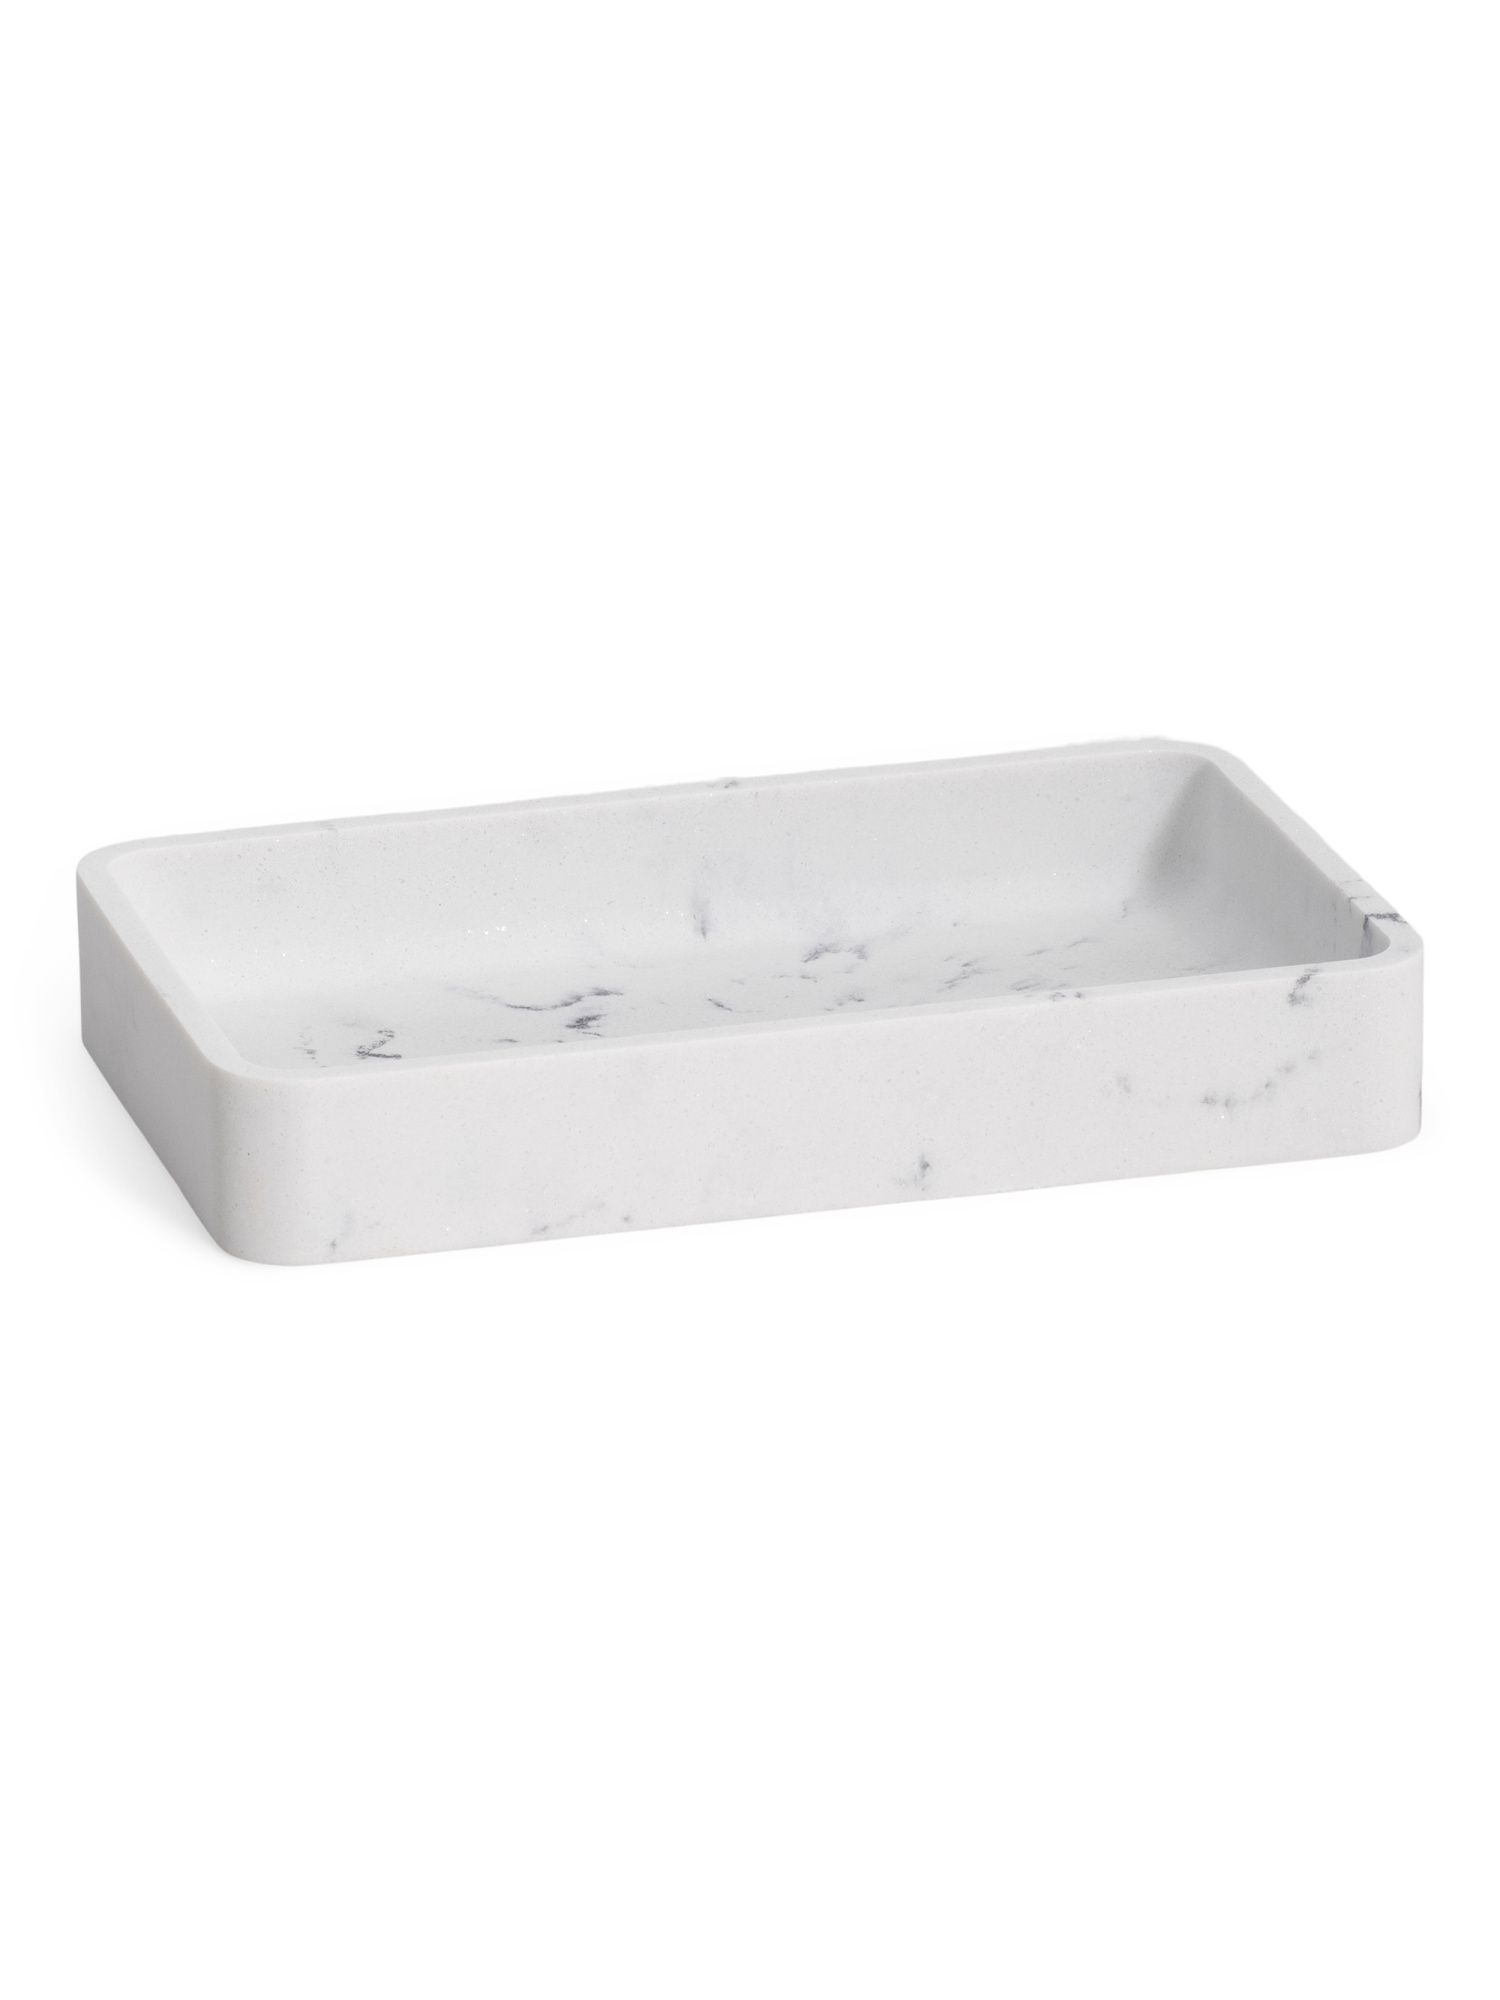 Resin Organizer Tray With Marble Look | TJ Maxx